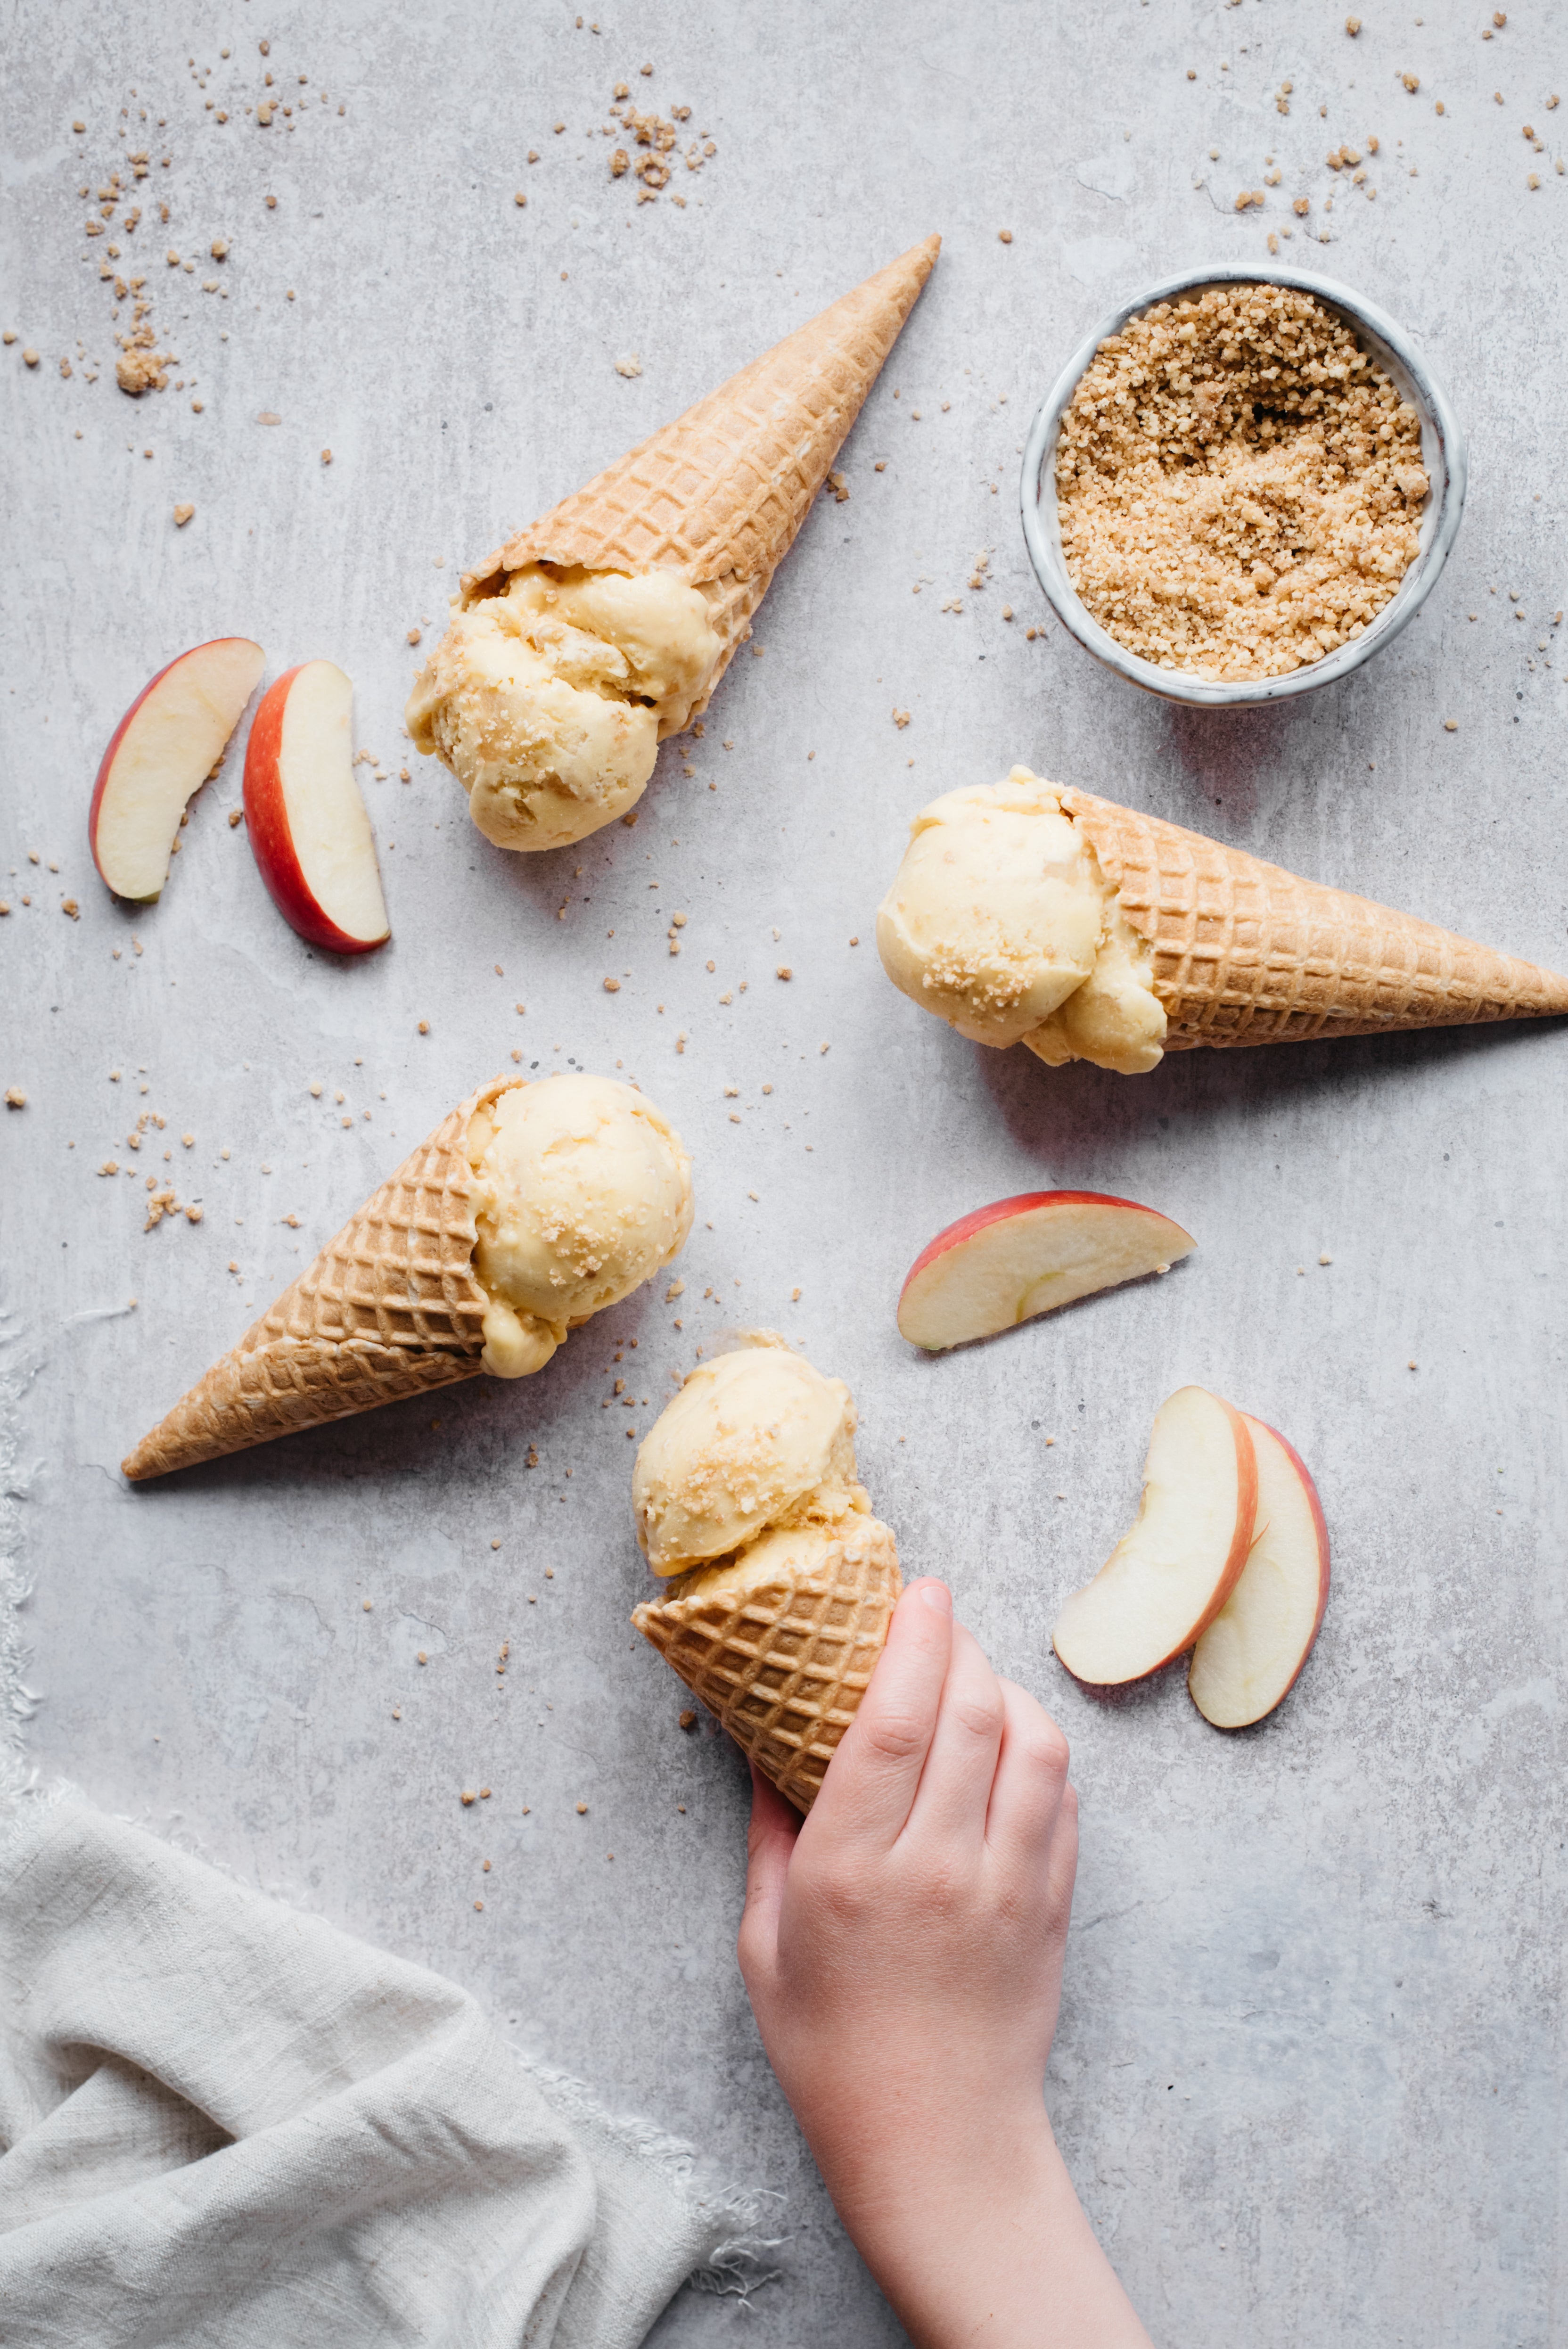 Scoops of homemade apple crumble ice cream in cones, surrounded by slices of apple